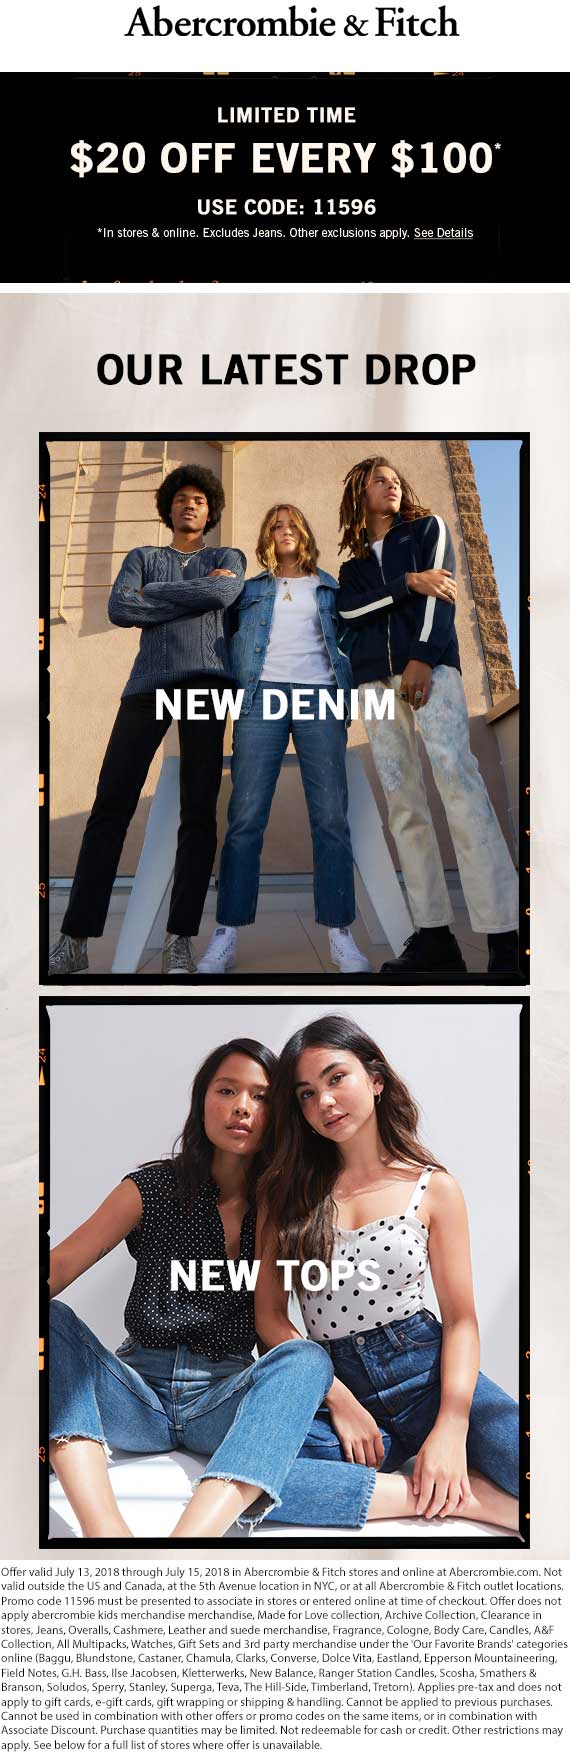 Abercrombie & Fitch June 2020 Coupons and Promo Codes